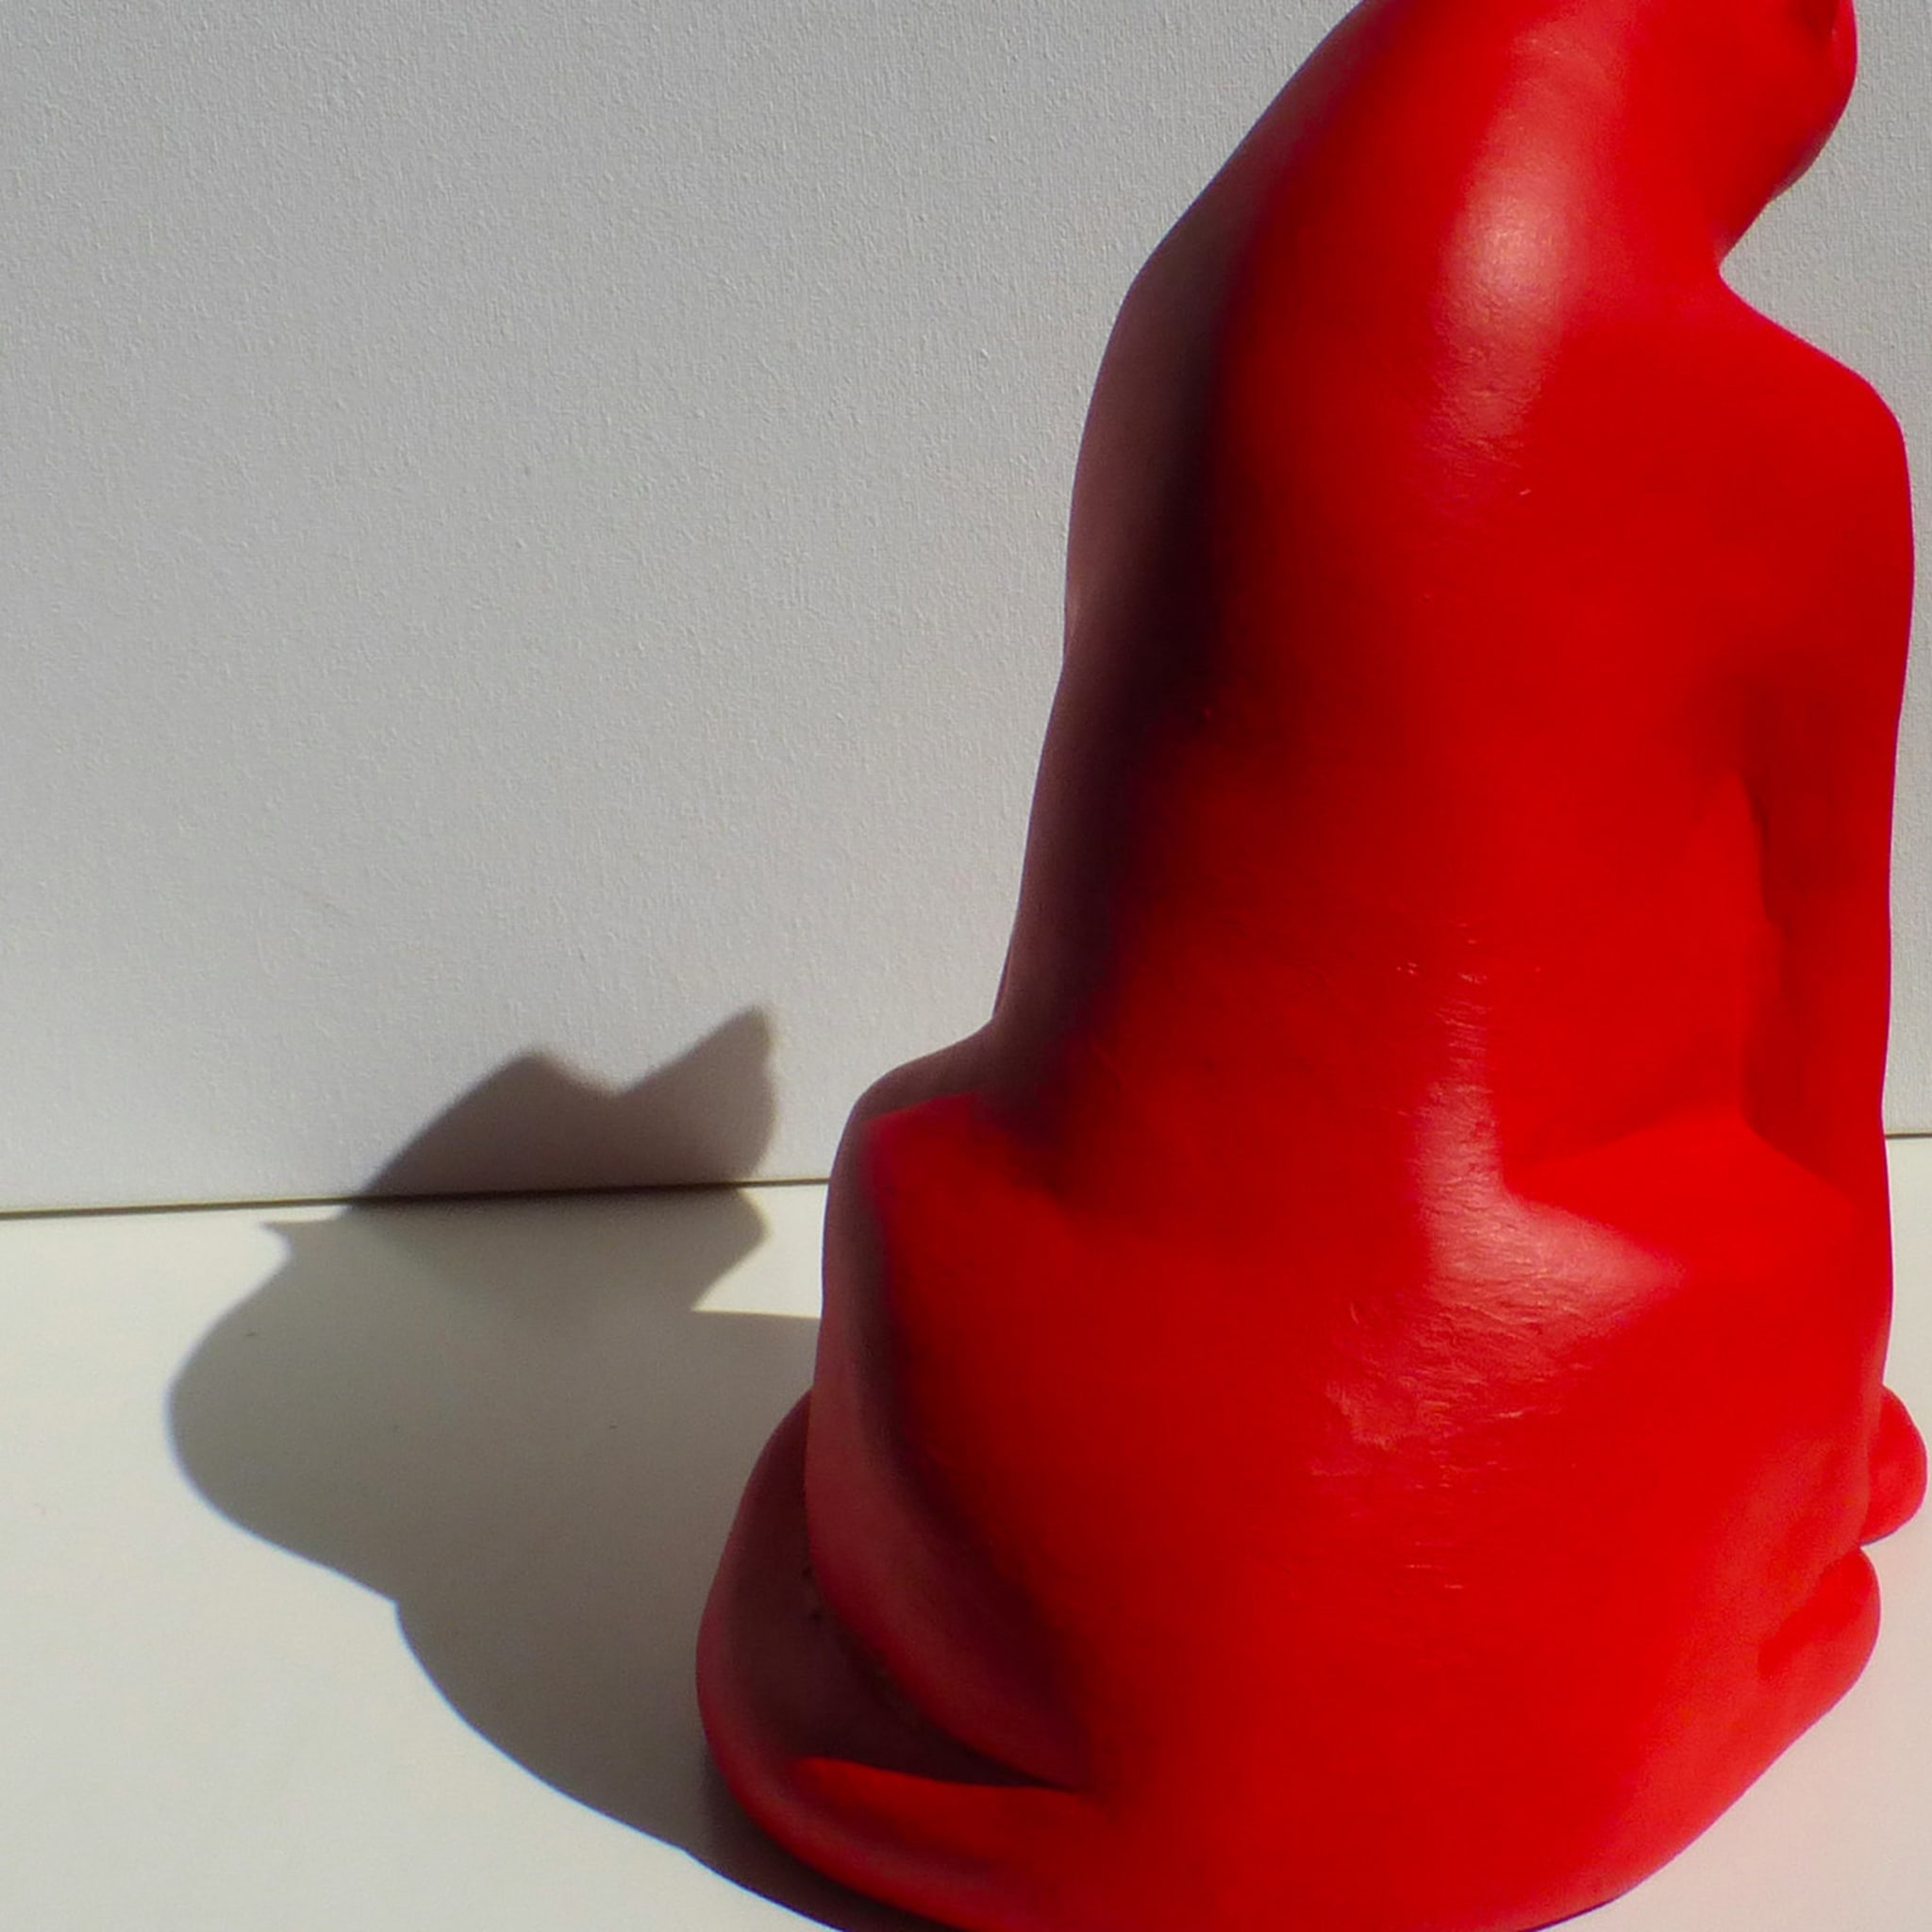 Bright Red Panther Sculpture - Alternative view 3